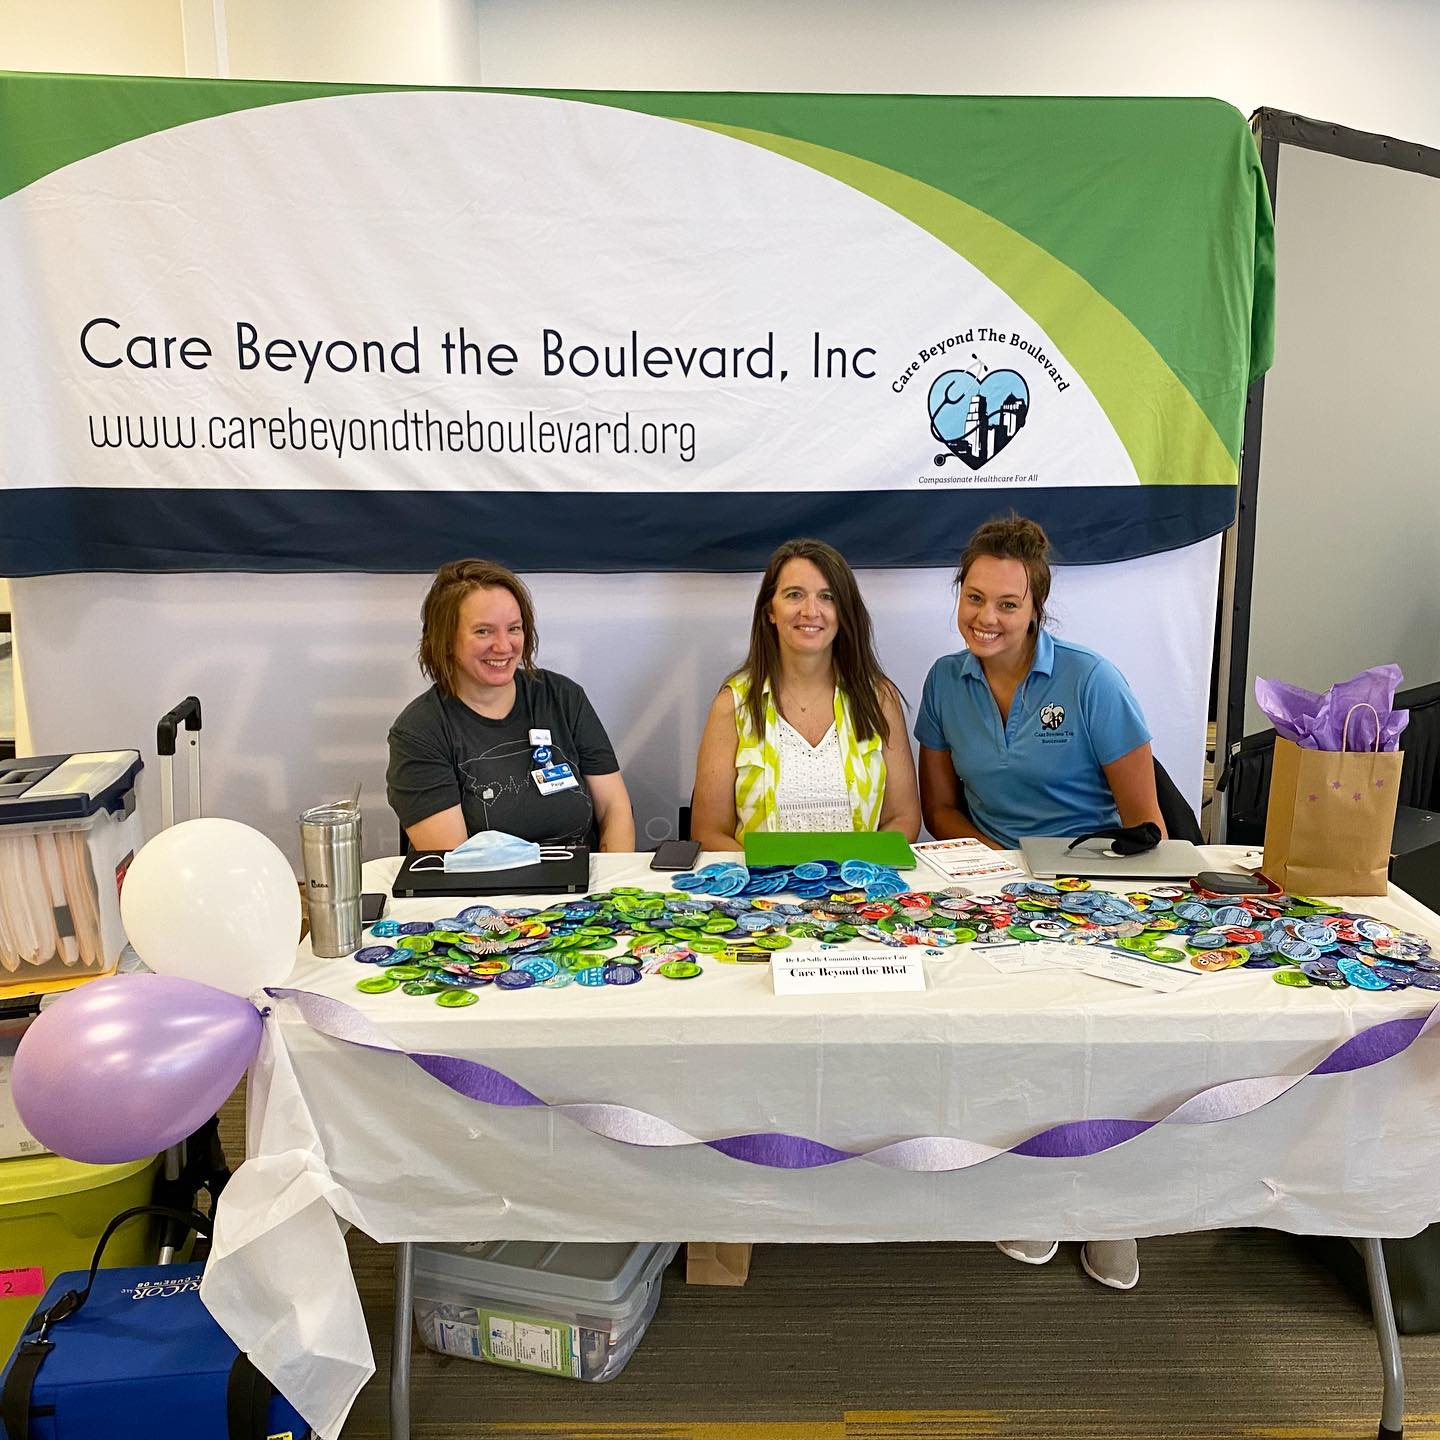 Three woman sit behind table covered in small freebies and smile at the camera. Behind them is a Care Beyond the Boulevard banner